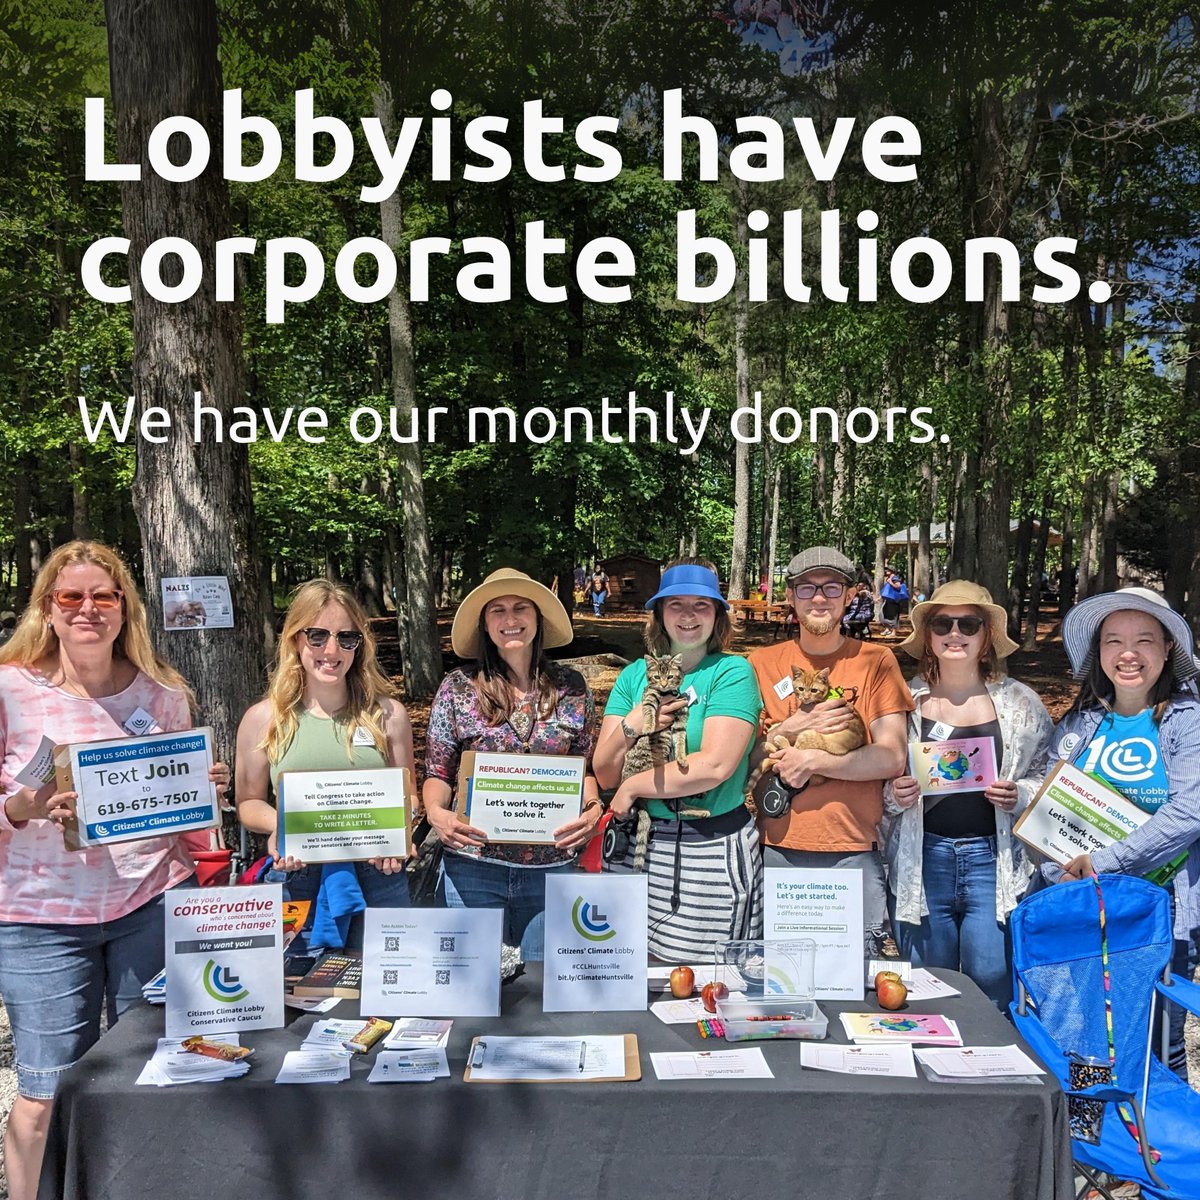 Lobbying works. It’s why corporations spend billions of dollars on it every year. We don’t have corporate billions, but with your help, we can get the funds we need to make lobbying work for the planet, not for profit.